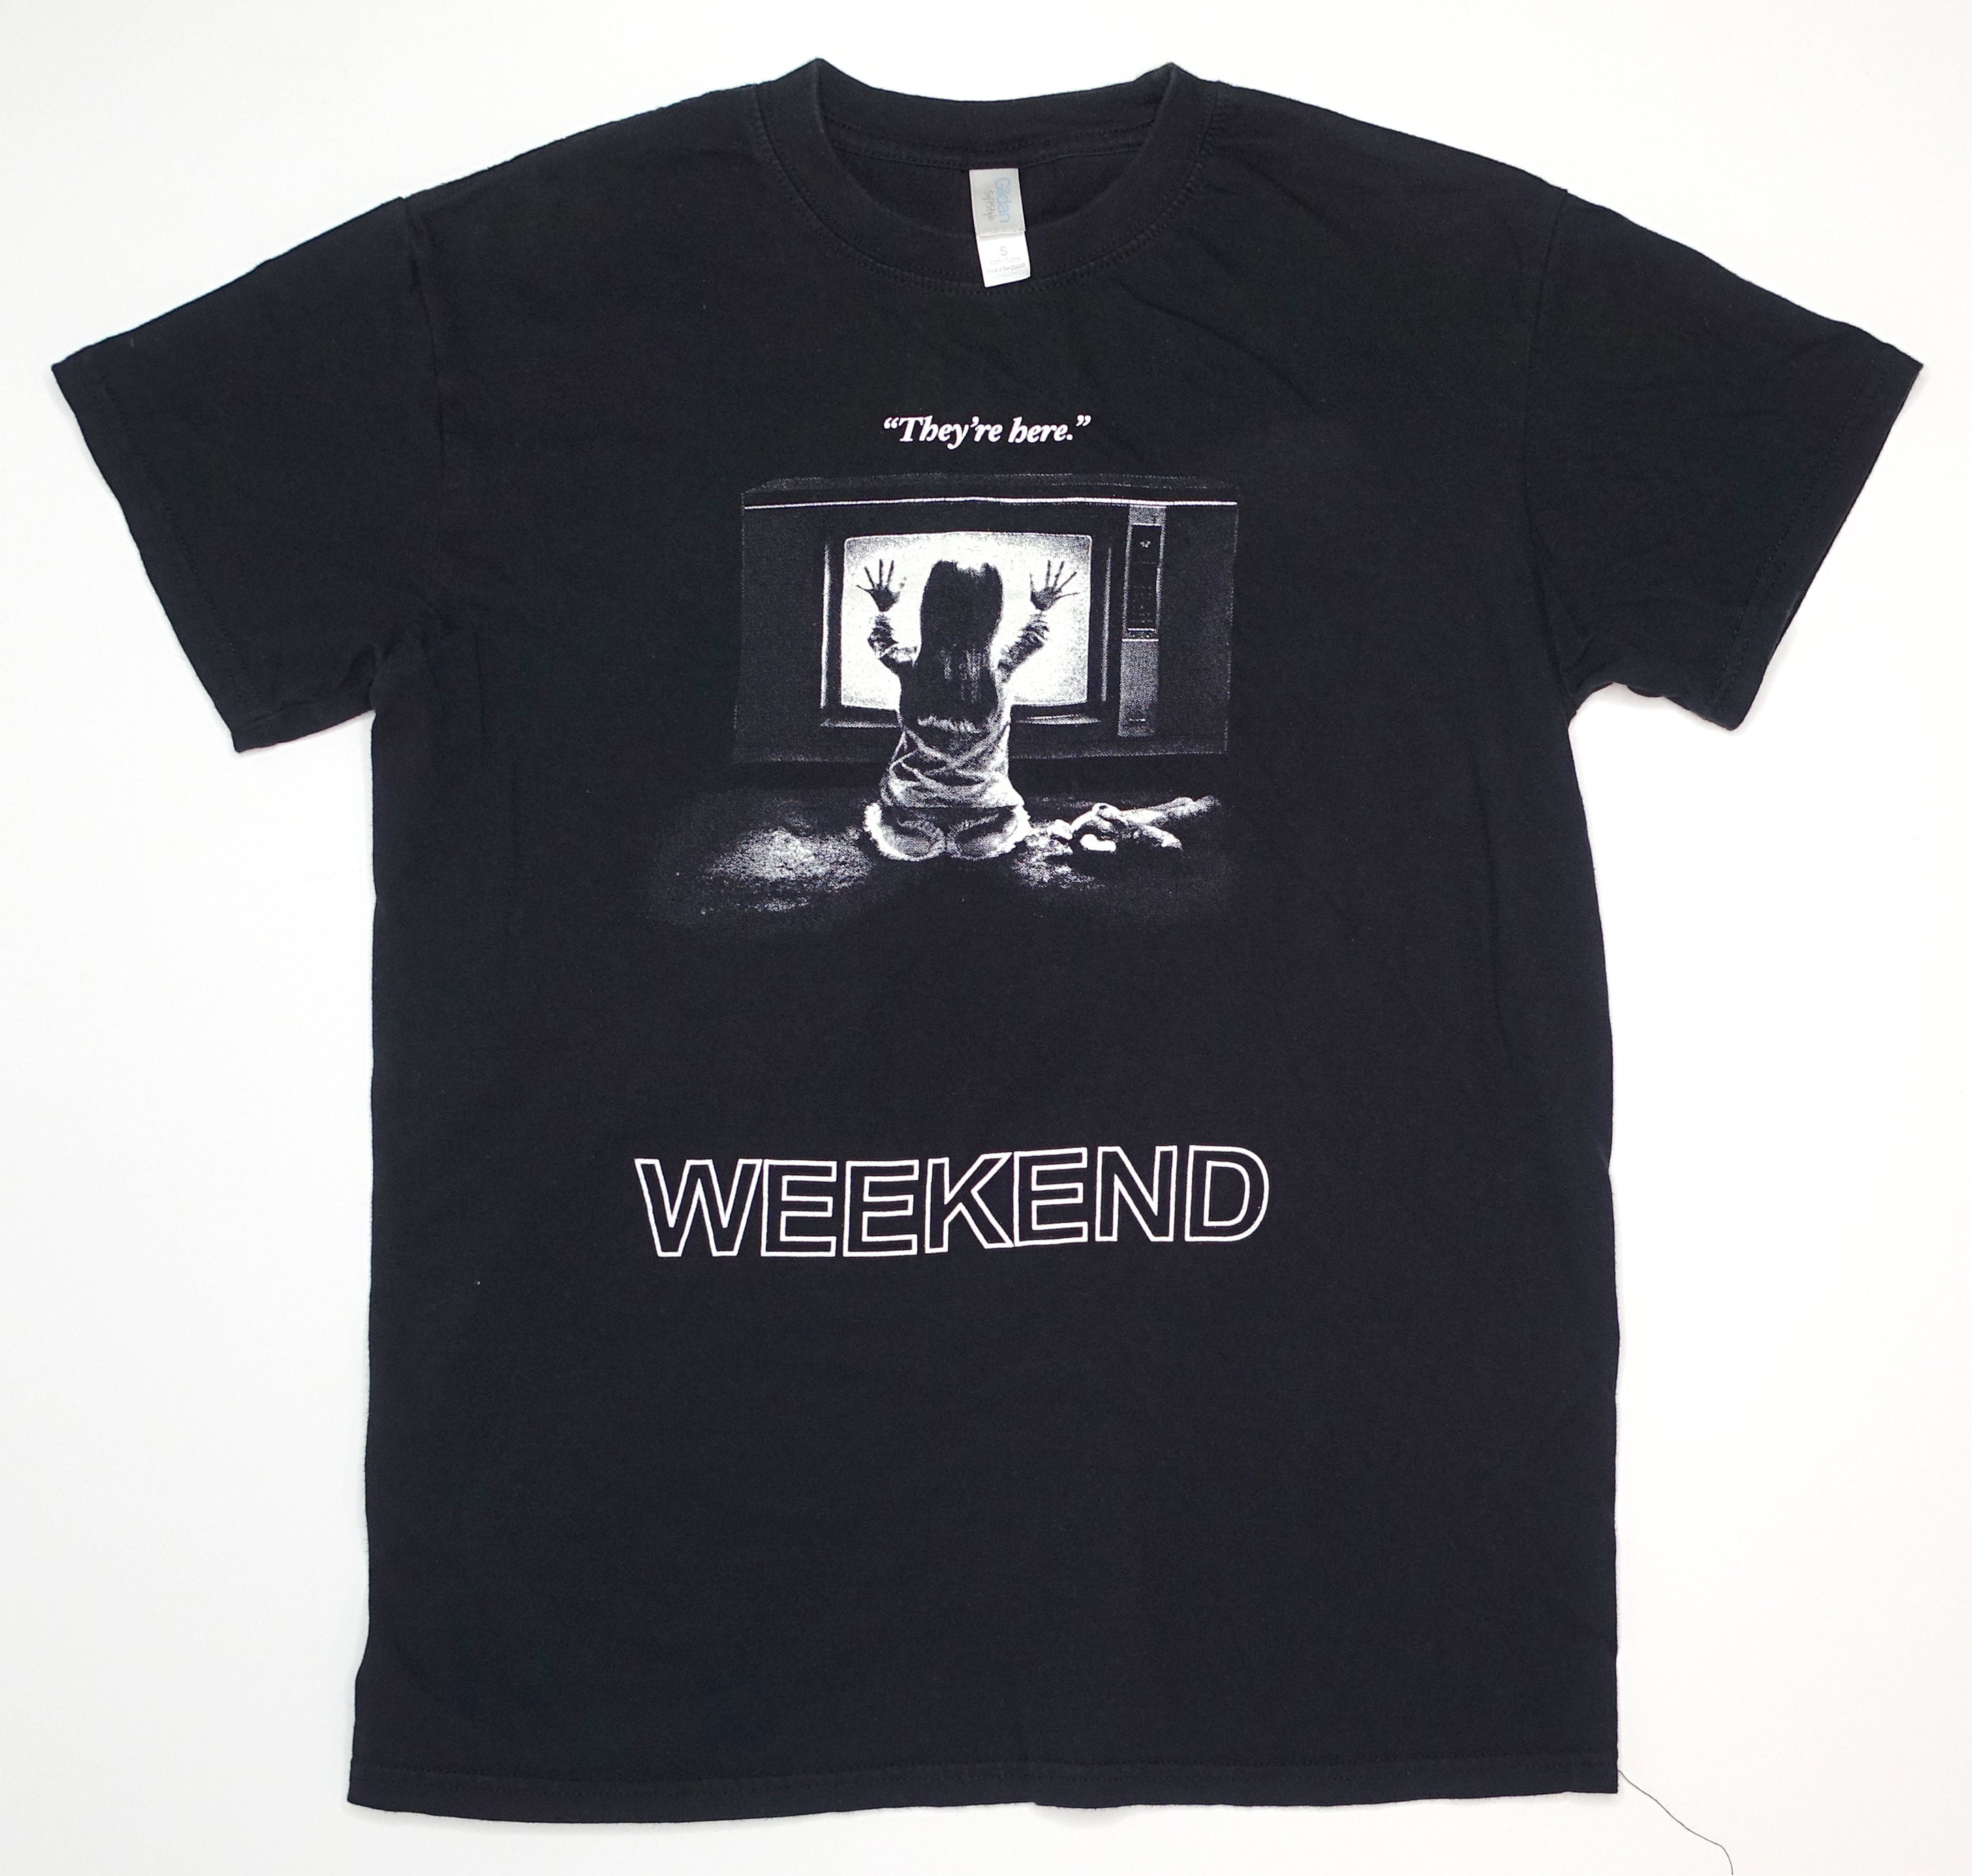 Weekend – They're Here Poltergeist Tour Shirt Size Small